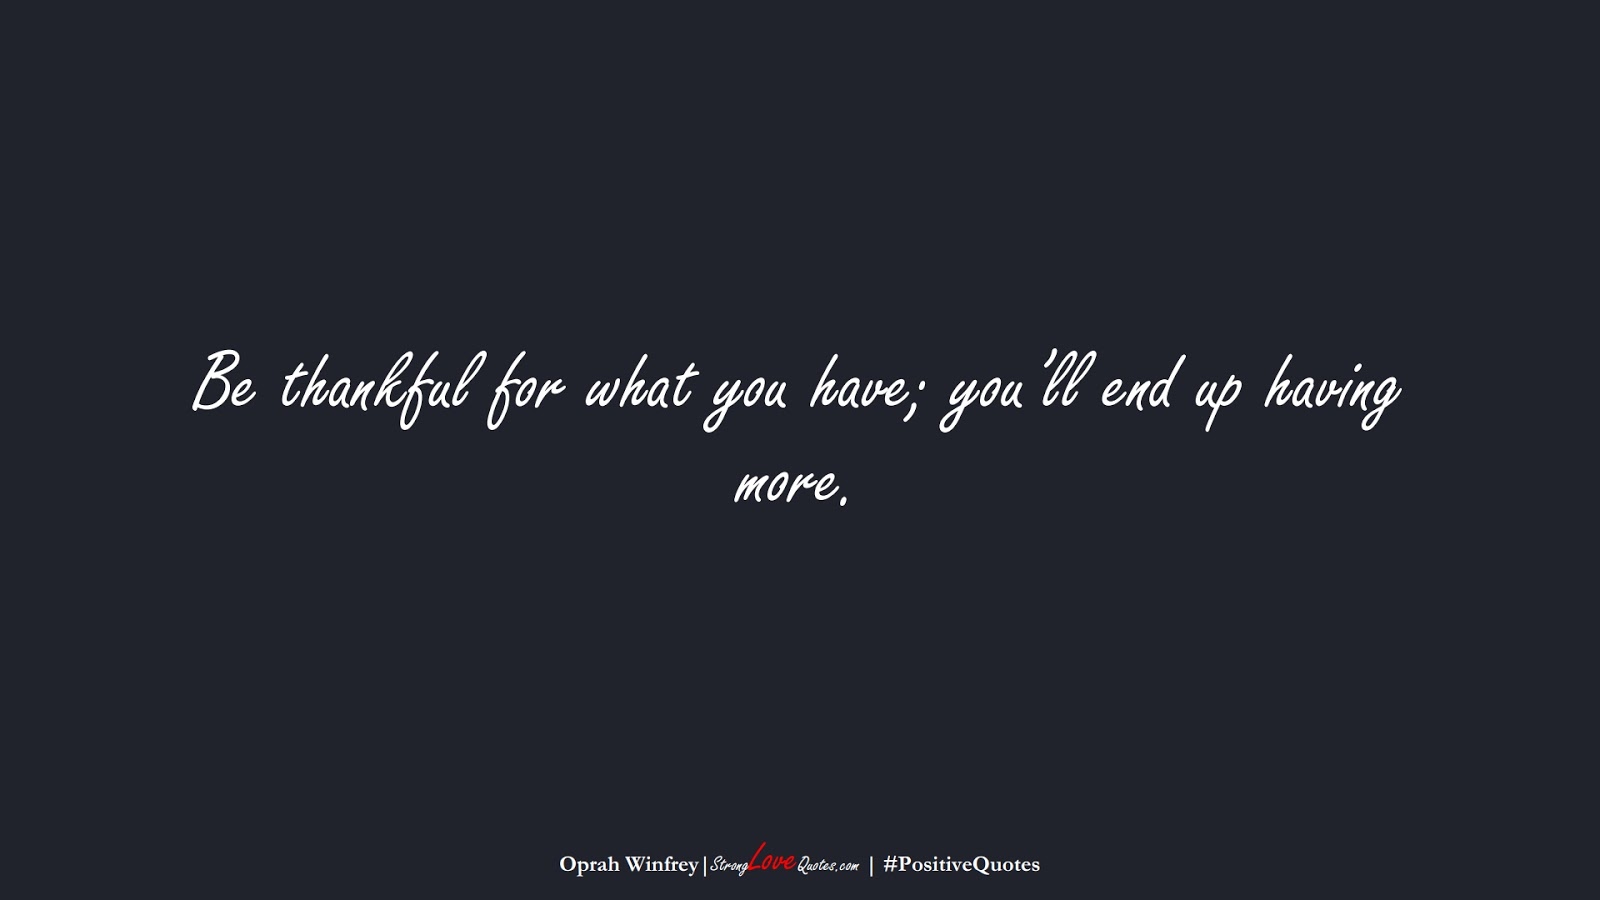 Be thankful for what you have; you’ll end up having more. (Oprah Winfrey);  #PositiveQuotes